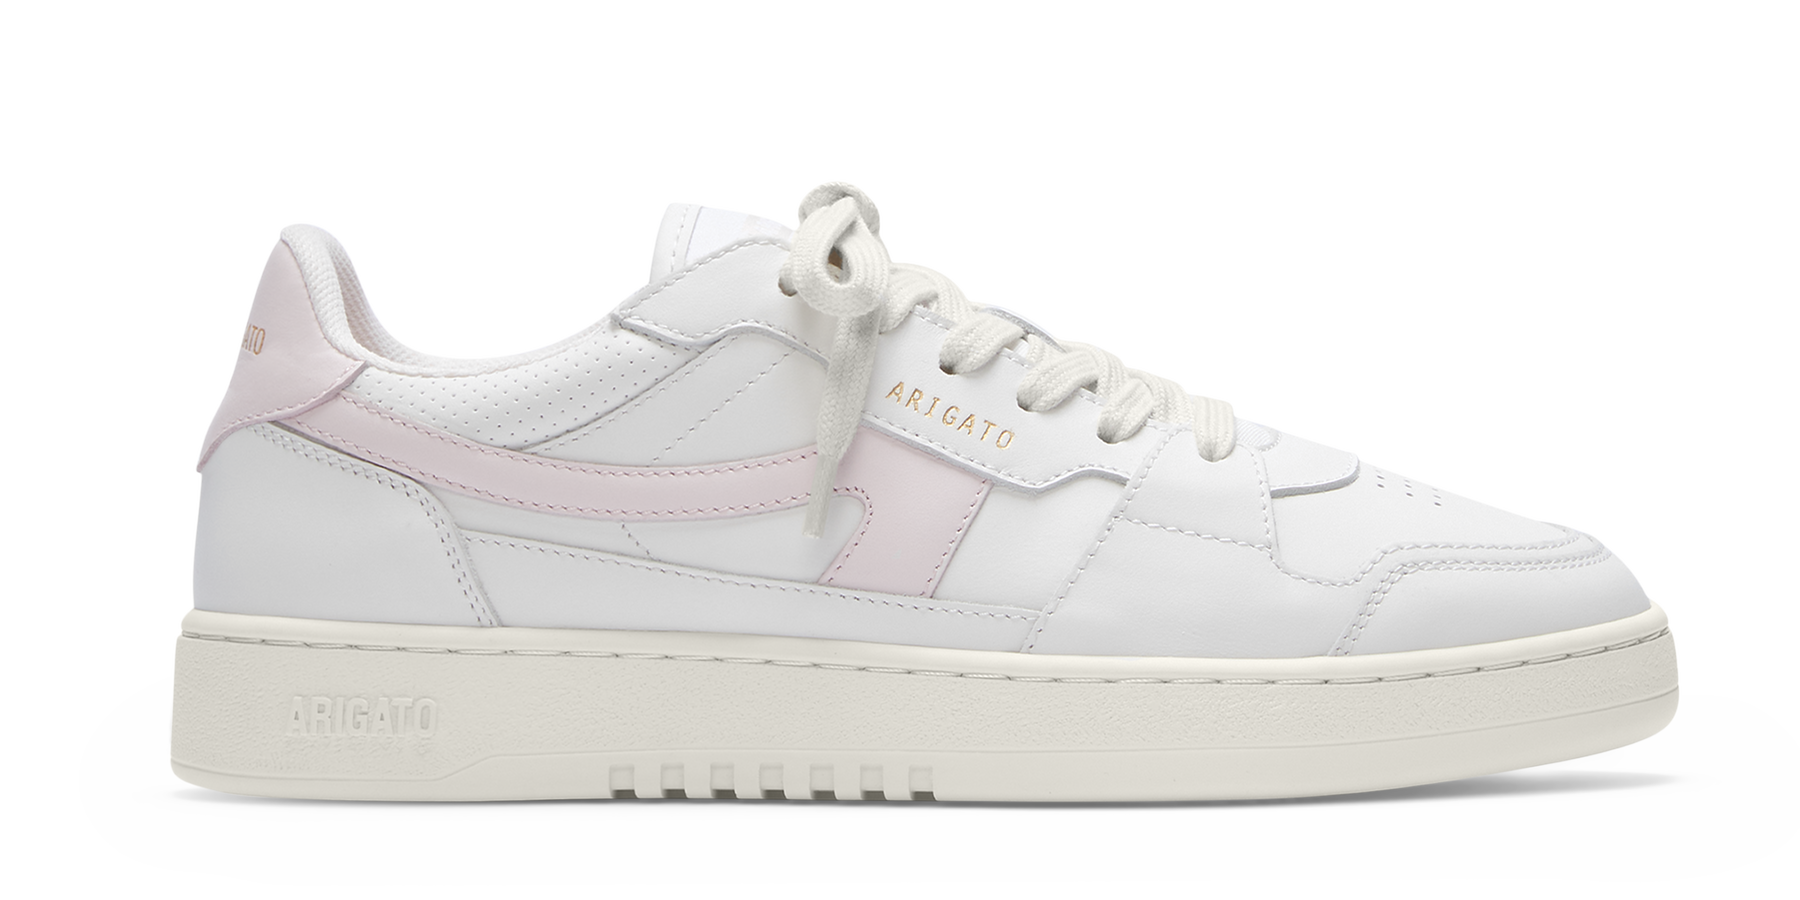 Dice-A Sneaker - White/Pink